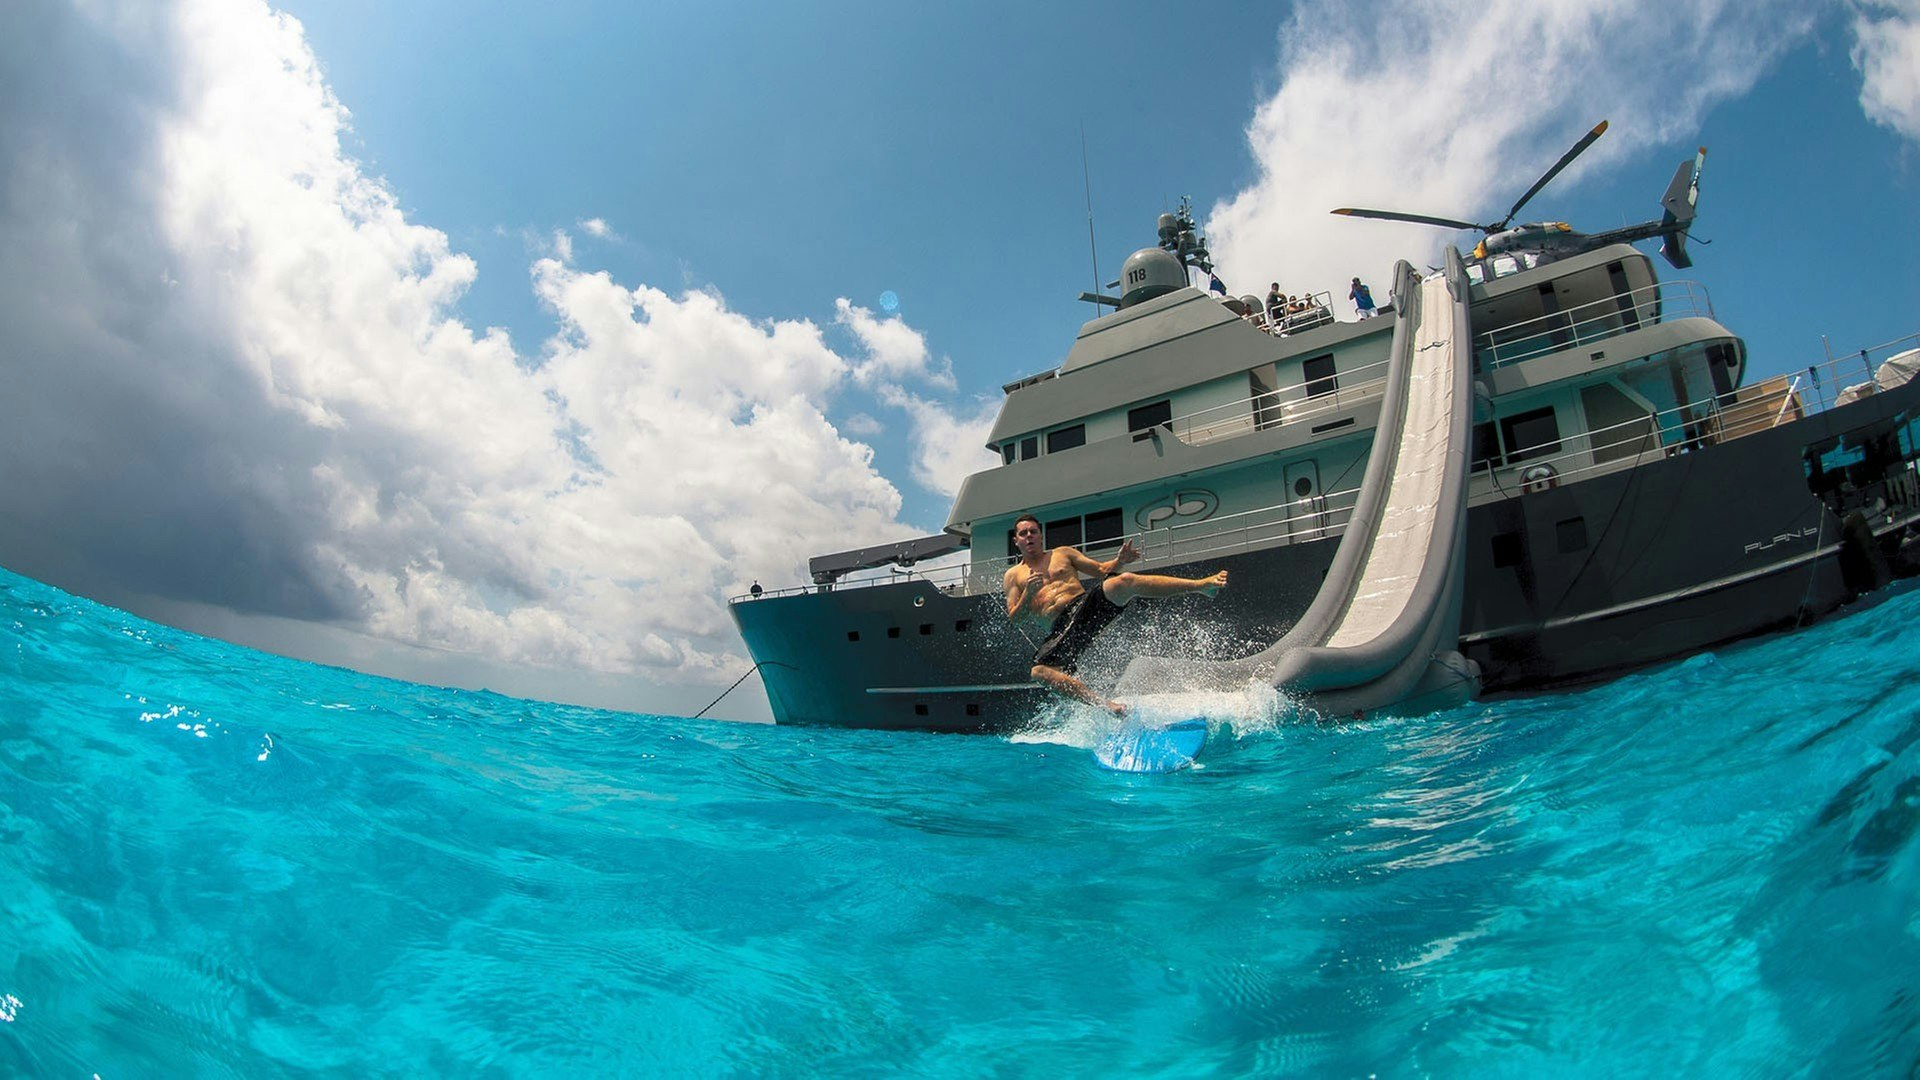 Freestyle slide off the side of motor yacht